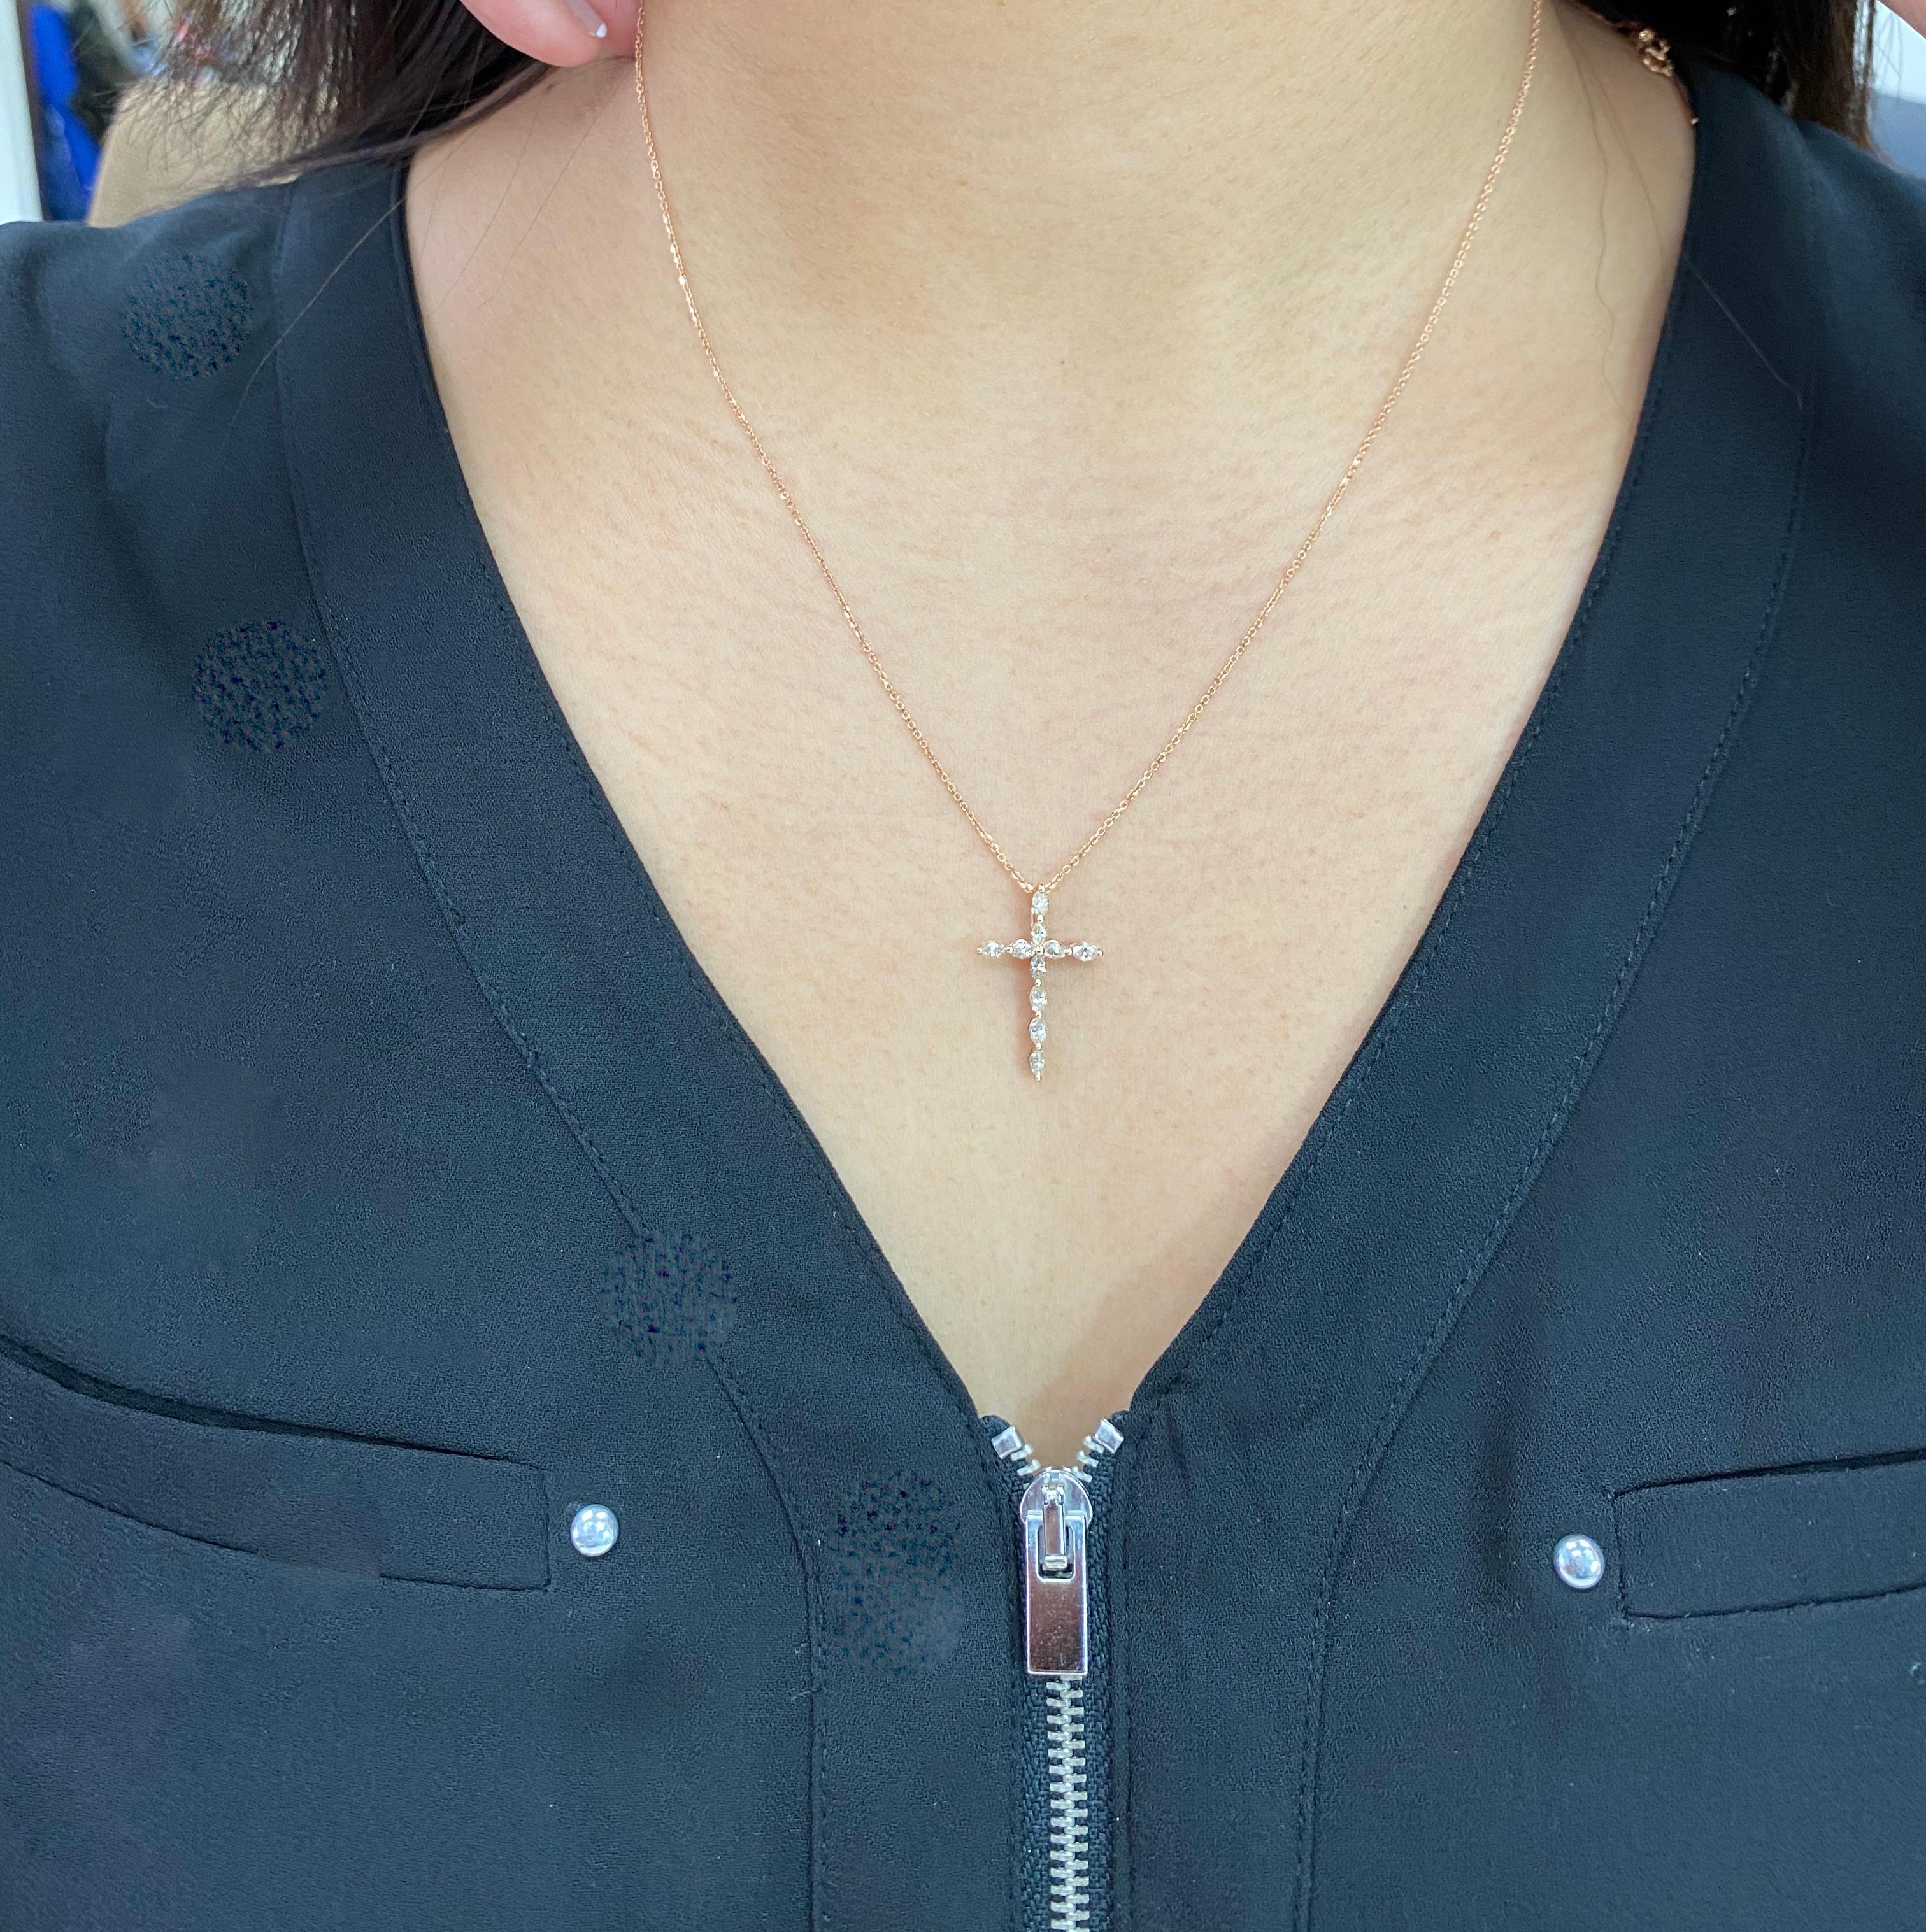 This is a beautiful classic cross pendant. It is set in 18k rose gold and diamonds. There are 10 Marquis shaped diamonds with a total carat weight of 0.60 cts that makeup this cross. An 18k rose gold chain will be included in this sale. This would